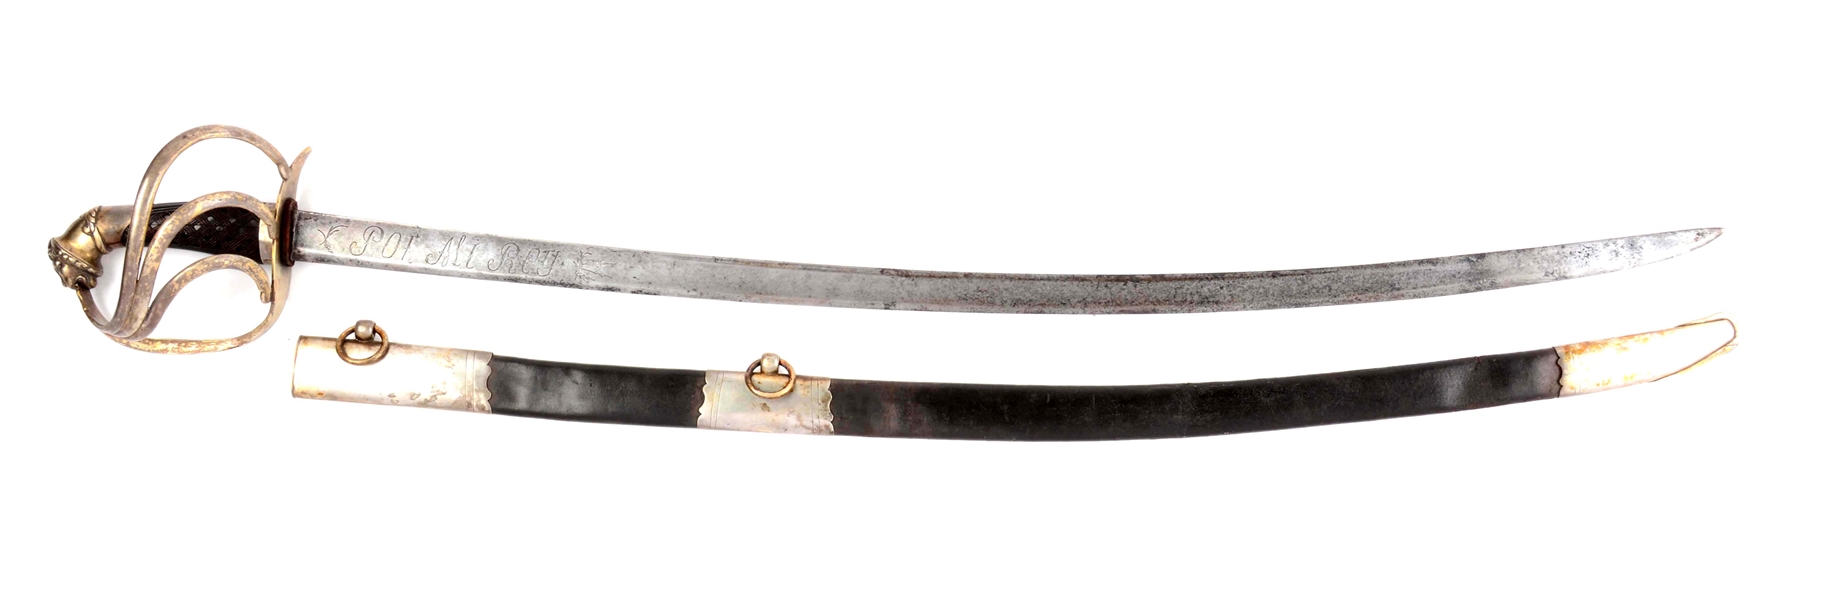 AMERICAN LION POMMEL SILVER HILTED SABER IN THE FRENCH STYLE, MARKED JAMES MERRICK WITH SCABBARD.